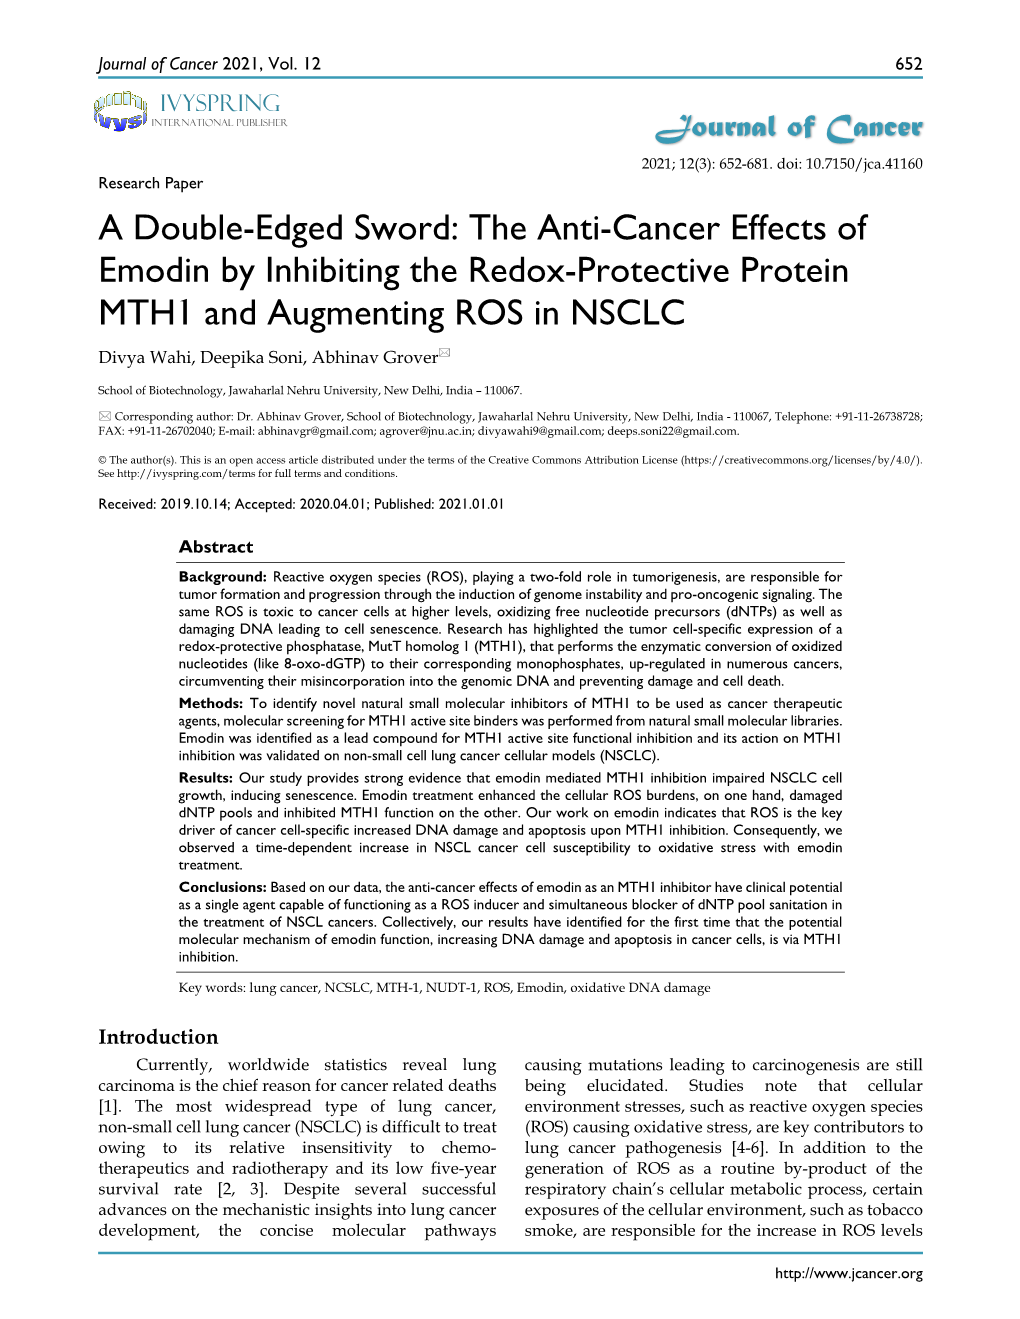 The Anti-Cancer Effects of Emodin by Inhibiting the Redox-Protective Protein MTH1 and Augmenting ROS in NSCLC Divya Wahi, Deepika Soni, Abhinav Grover